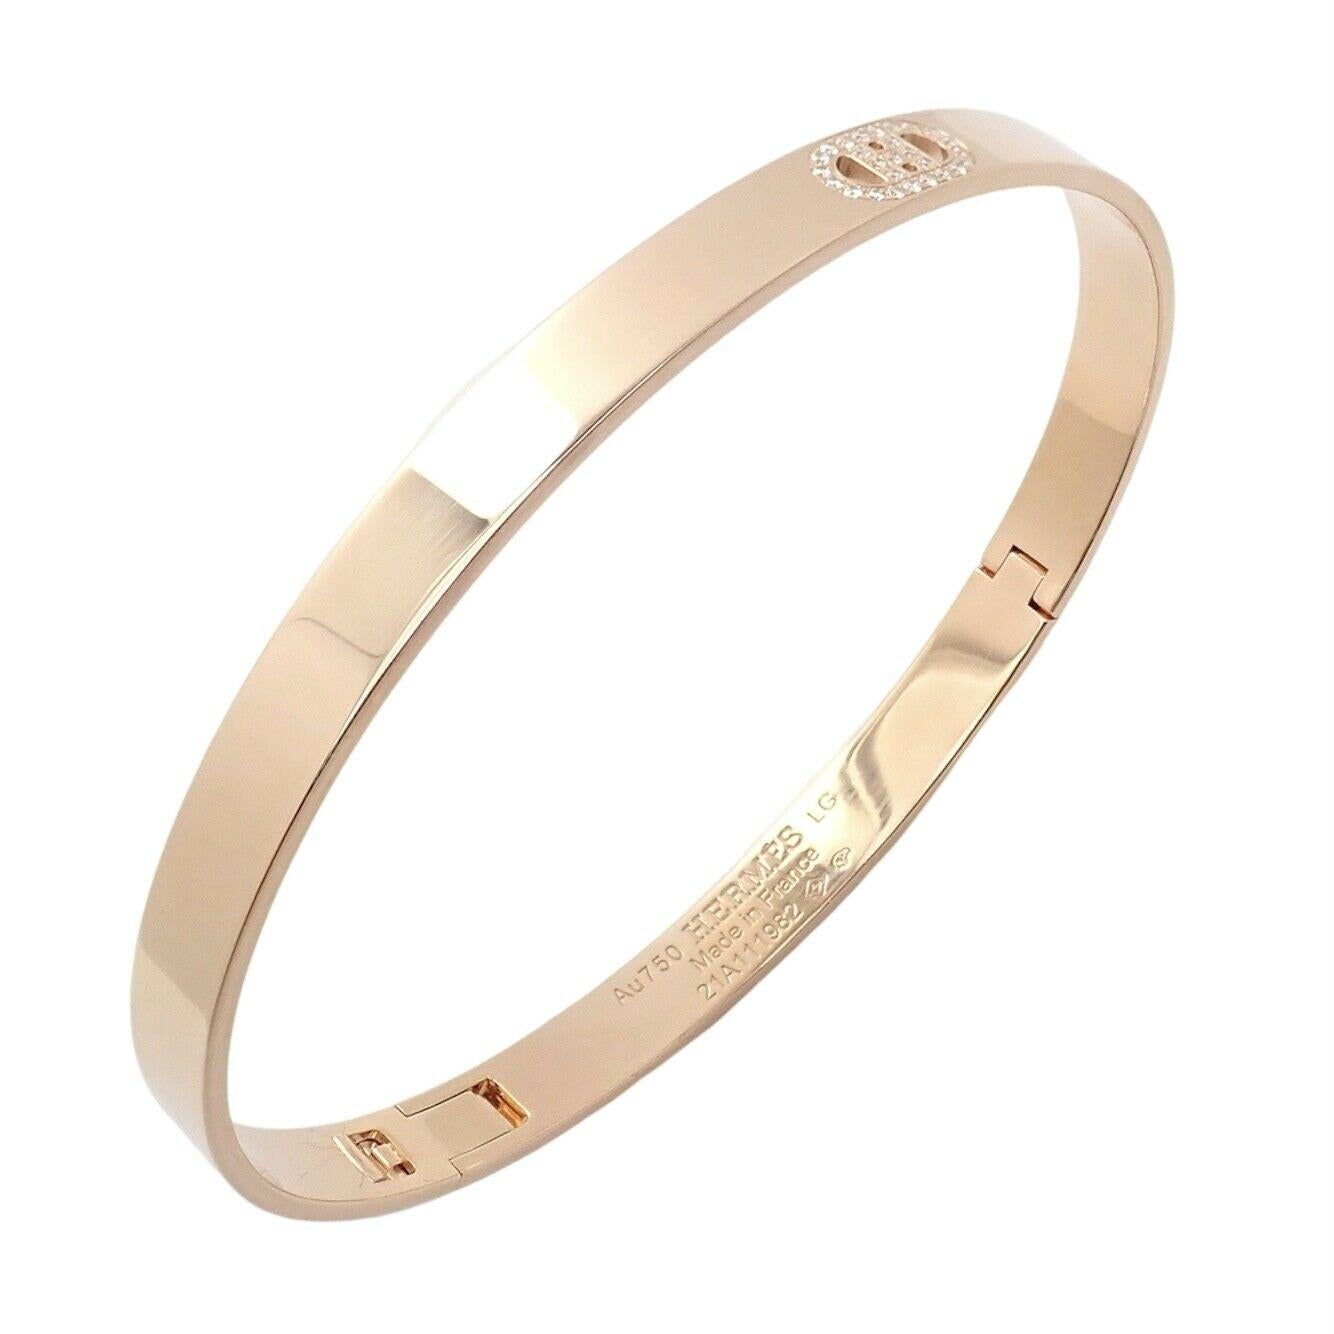 18k Rose Gold Diamond H D'Ancre Large Size Bangle Bracelet by Hermes. 
With 27 Round brilliant cut diamonds VVS1 clarity E color total weight approximately .07ct
Details: 
Length: Size: Length: 6.7